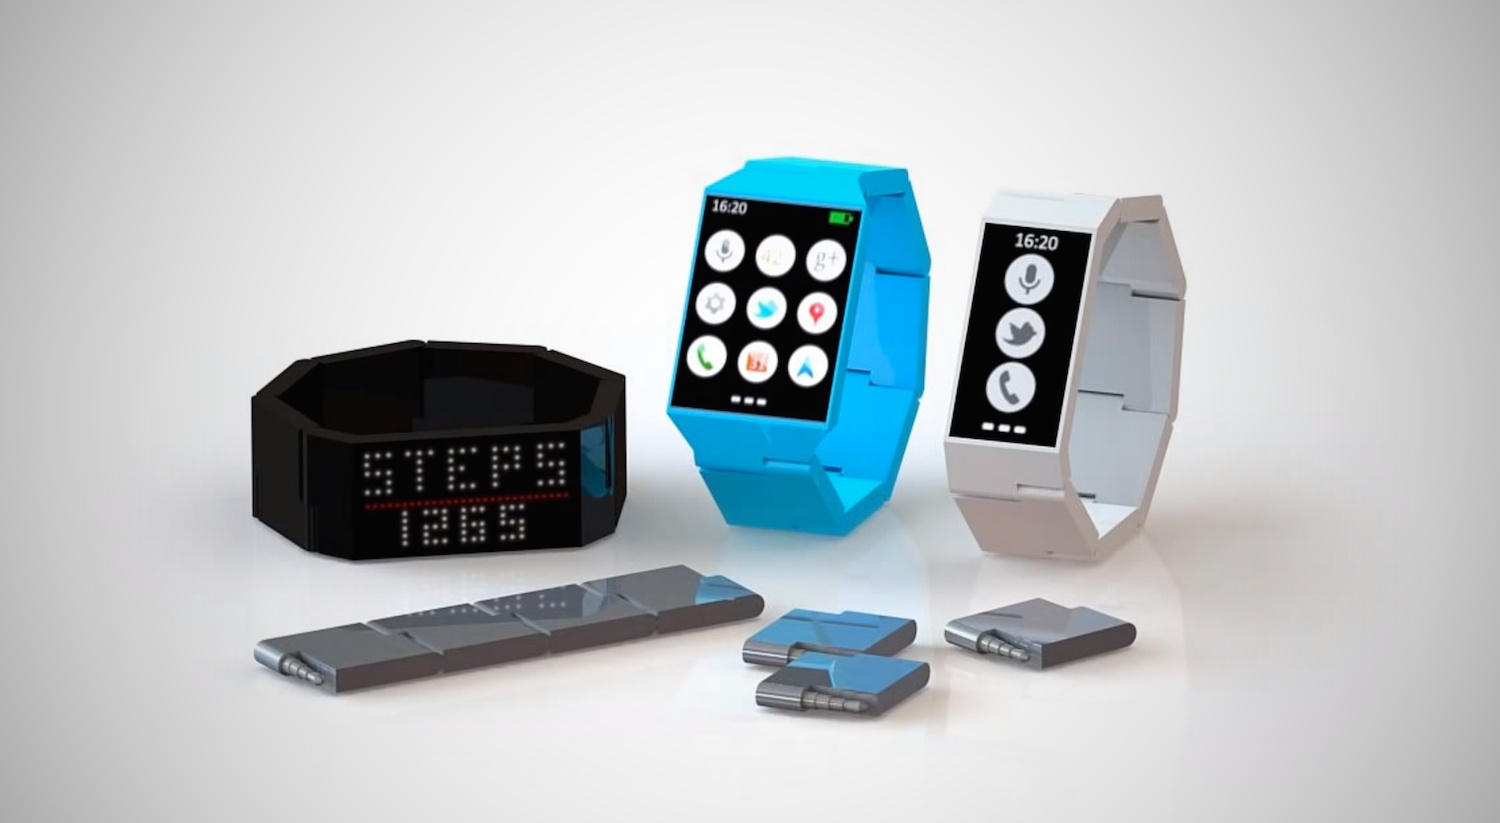 Blocks Is a Modular Smartwatch That Can Be Customised and Upgraded